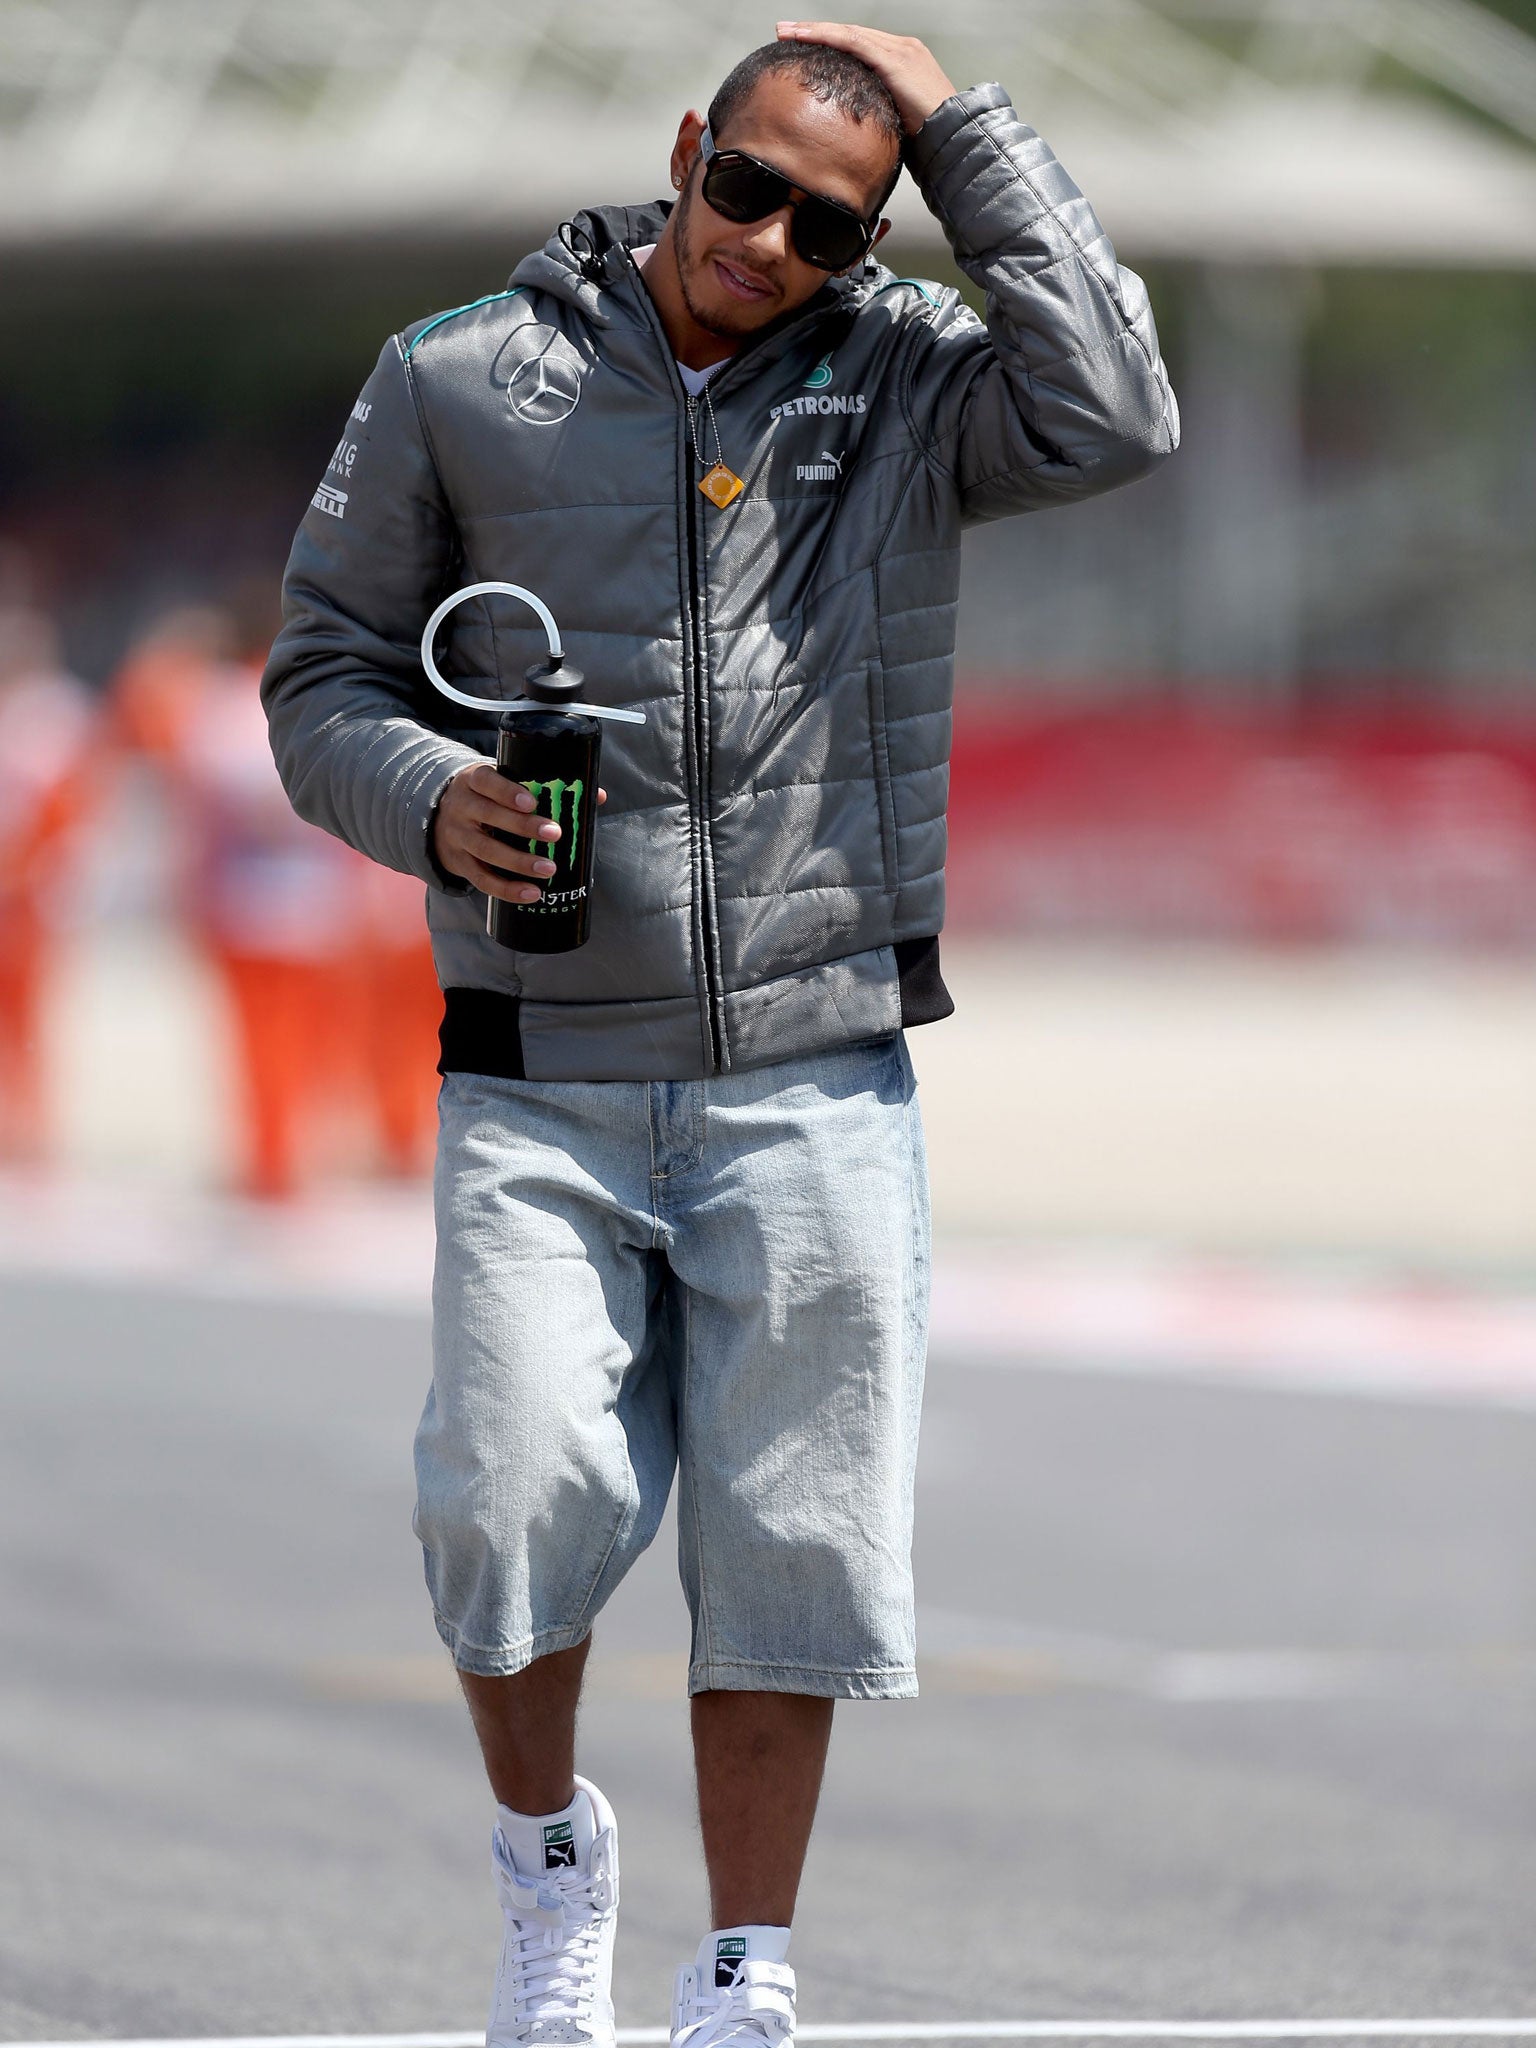 Hamilton started on the front row of the grid but finished 12th